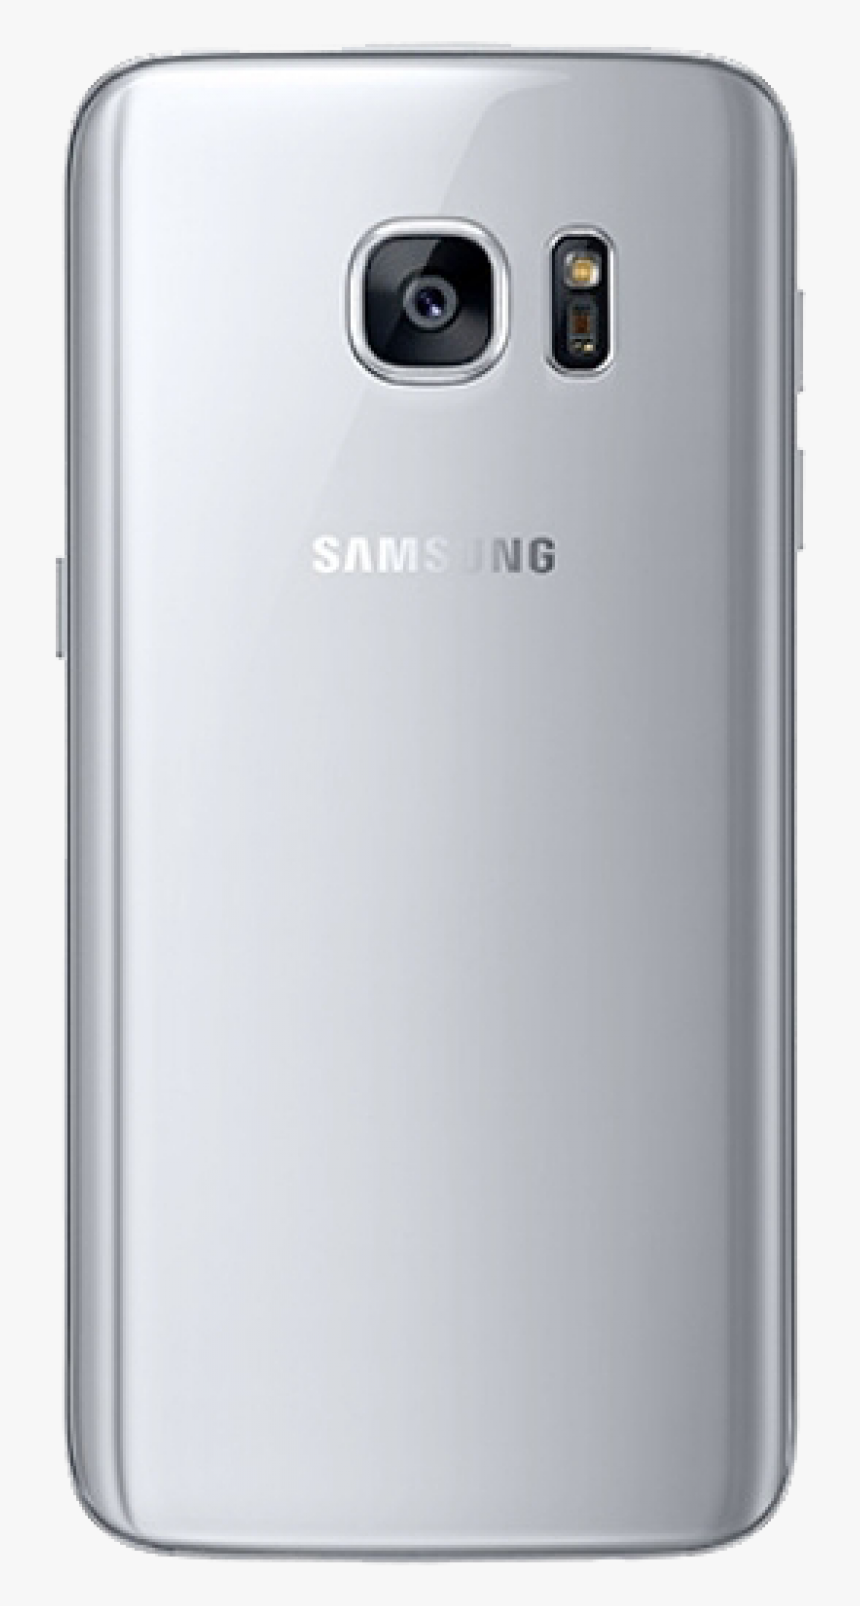 Galaxy S7 Png, Transparent Png, Free Download